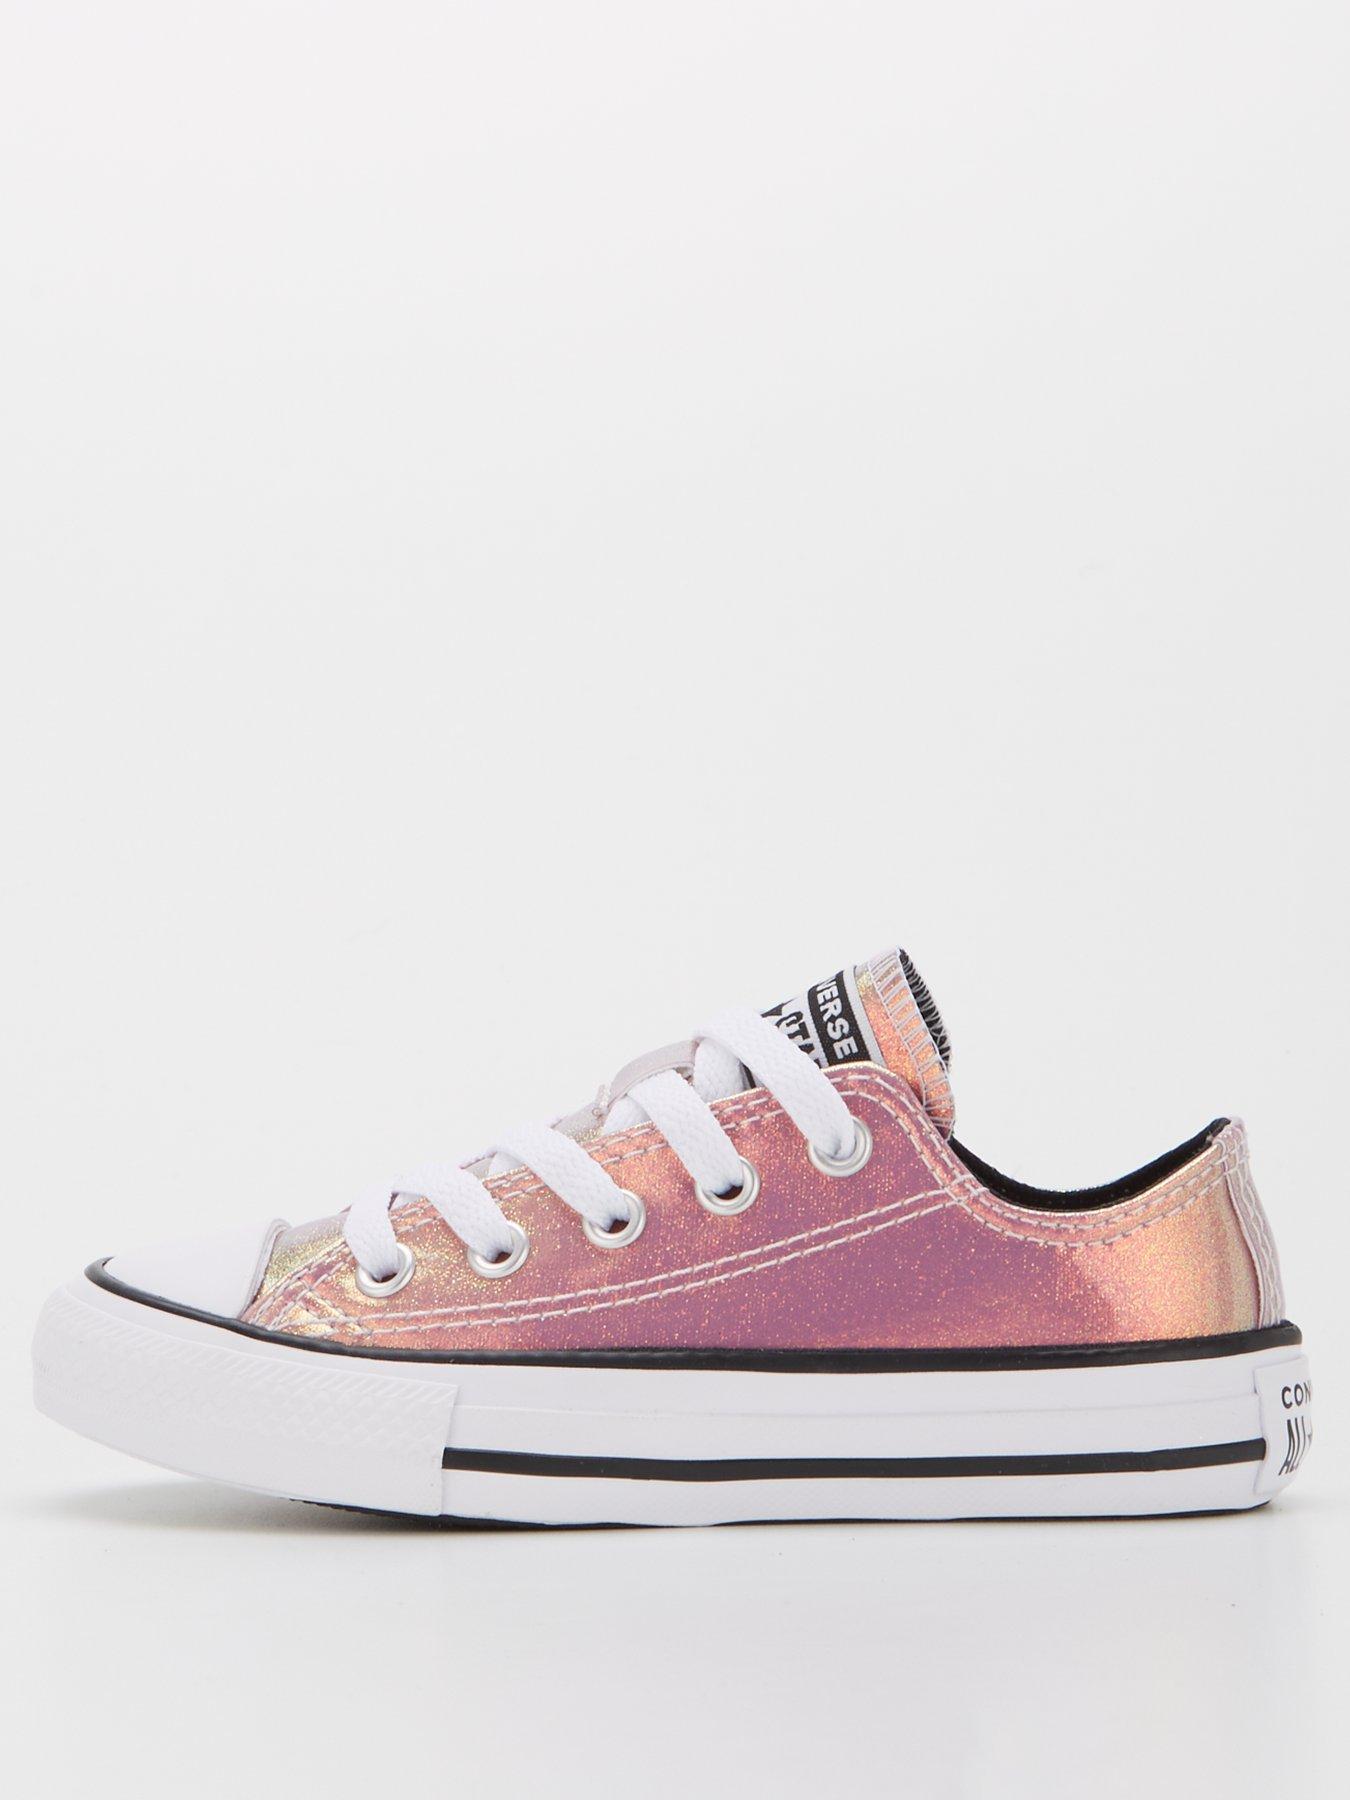  Chuck Taylor All Star Shiny Ox Children's Trainers - Shine